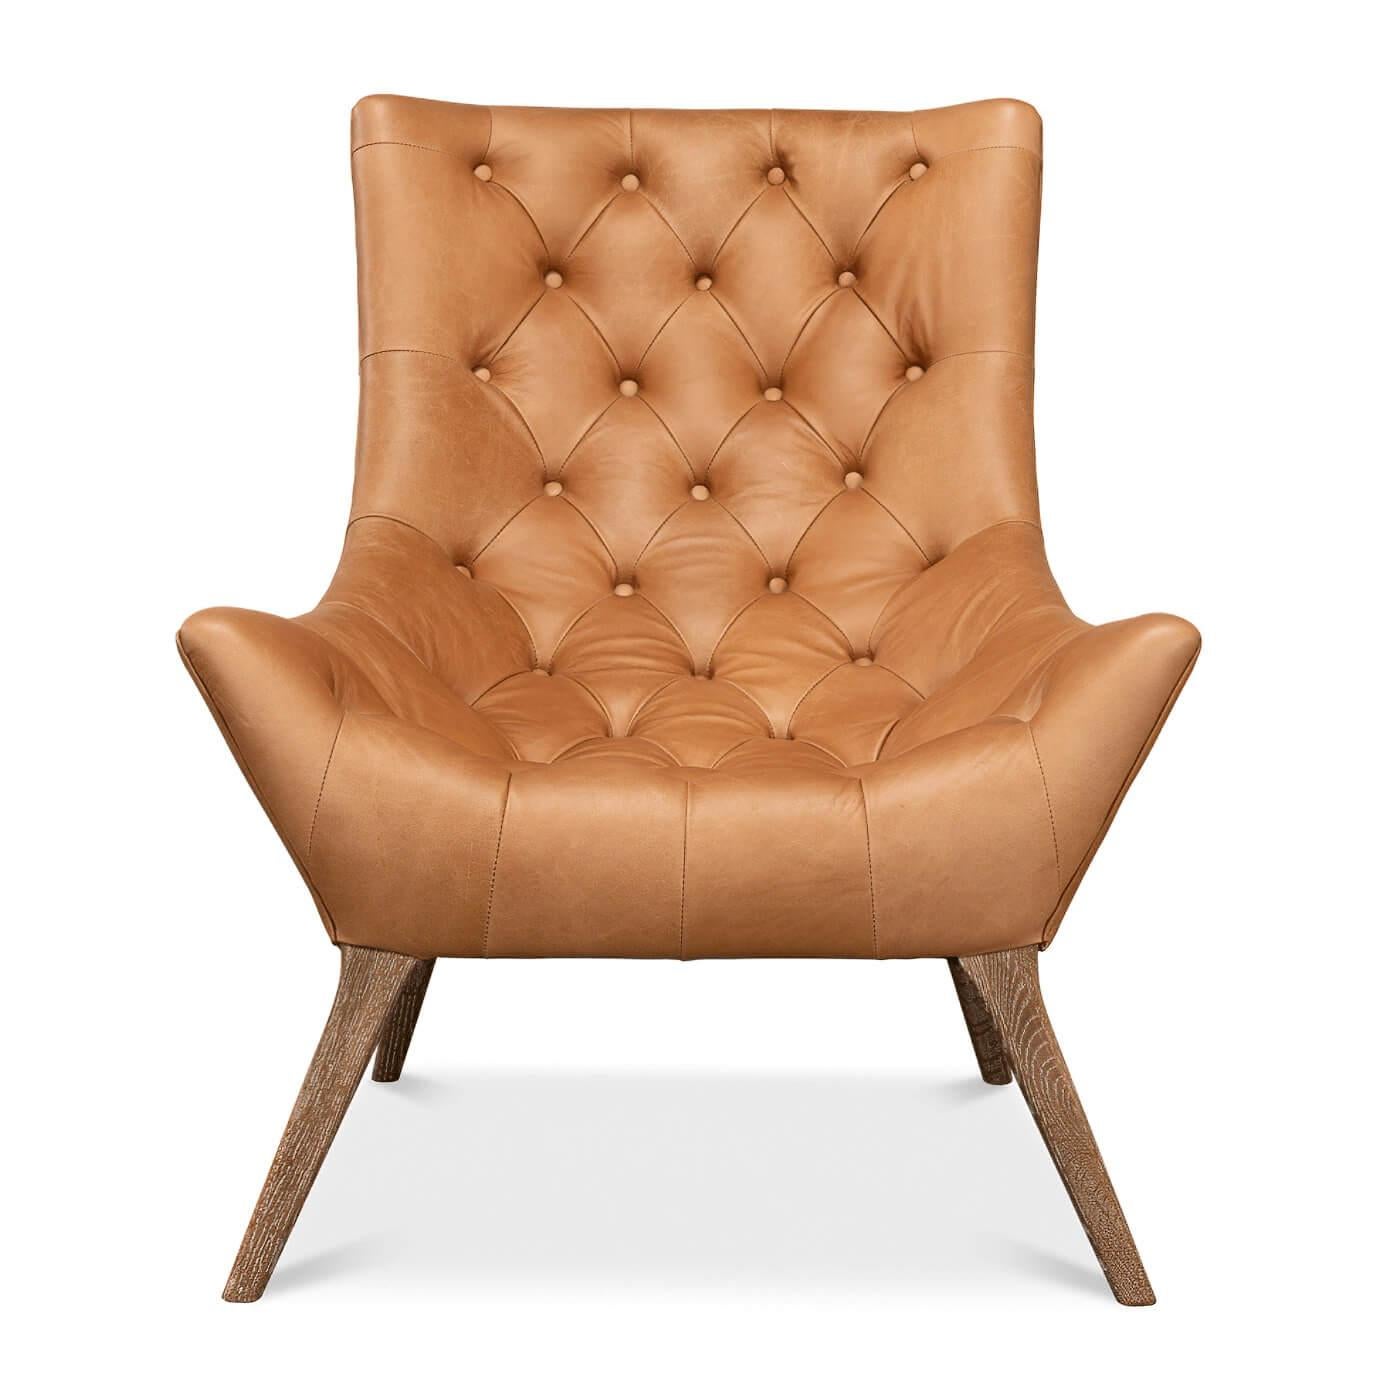 A mid-century style tufted leather armchair upholstered in light harness brown leather with splayed whitewashed oak legs. 

Dimension
32 in. W x 38 in. D x 38 in. H 
Seat: 23 in. W x 21 in. D x 16 in. H 
Arm: 20 in. H.
 